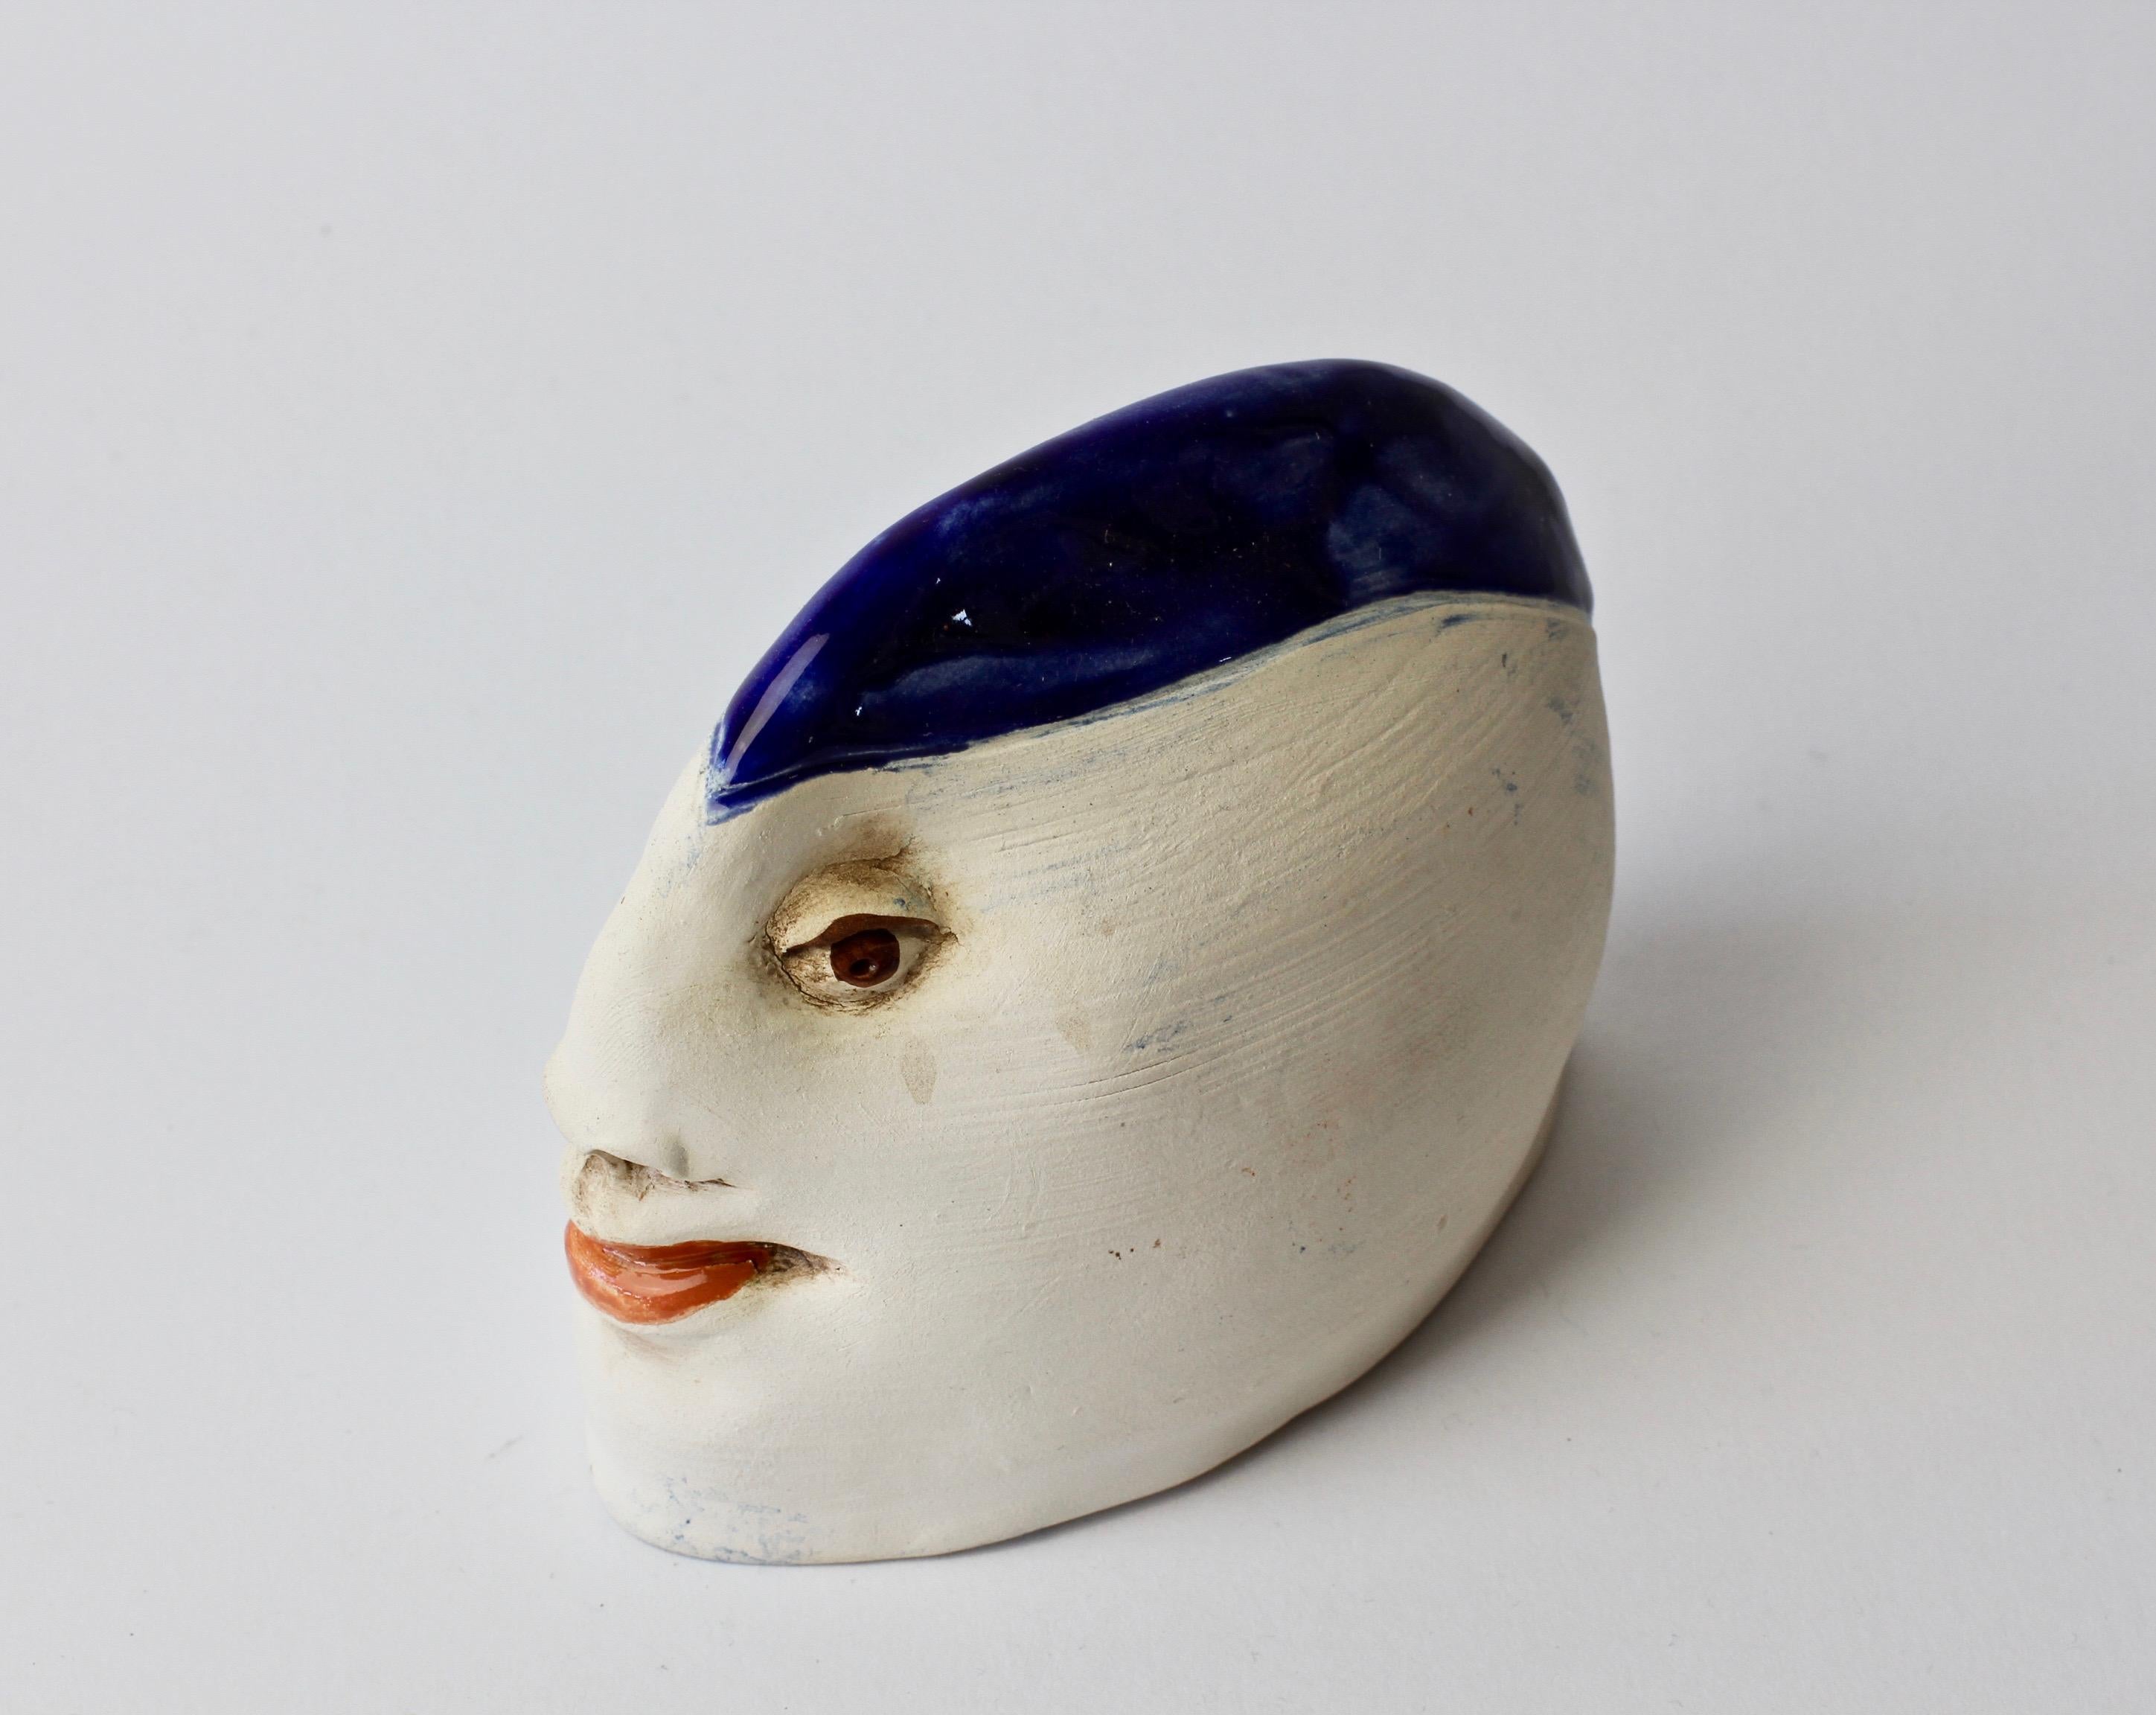 Unusual Quirky Vintage Hand Thrown Glazed Pottery Sculpture of a Head with Face  4